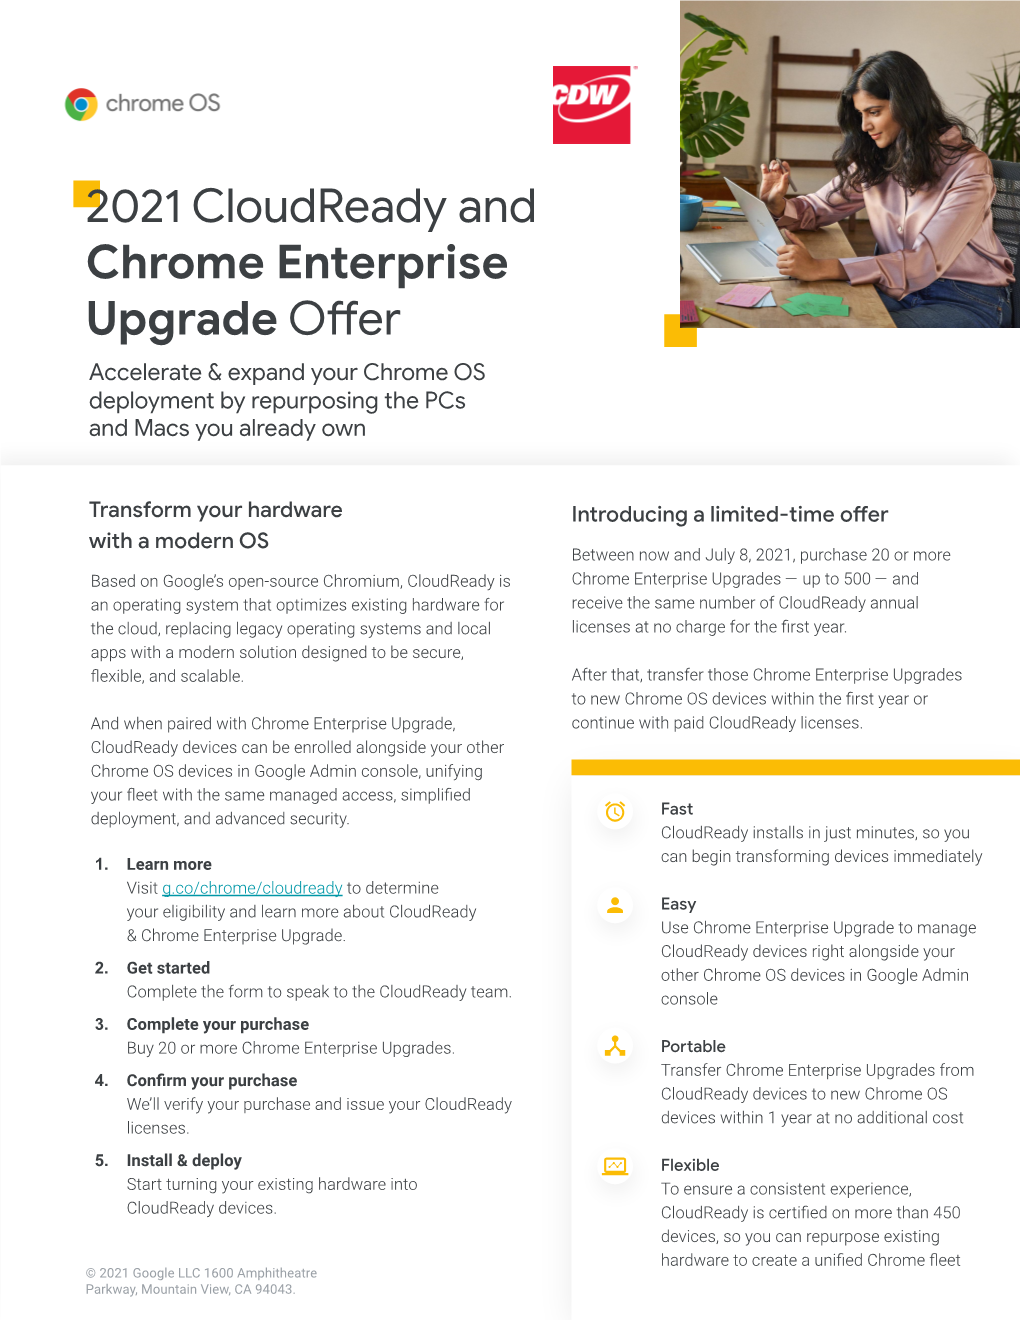 2021 Cloudready and Chrome Enterprise Upgrade Offer Accelerate & Expand Your Chrome OS Deployment by Repurposing the Pcs and Macs You Already Own